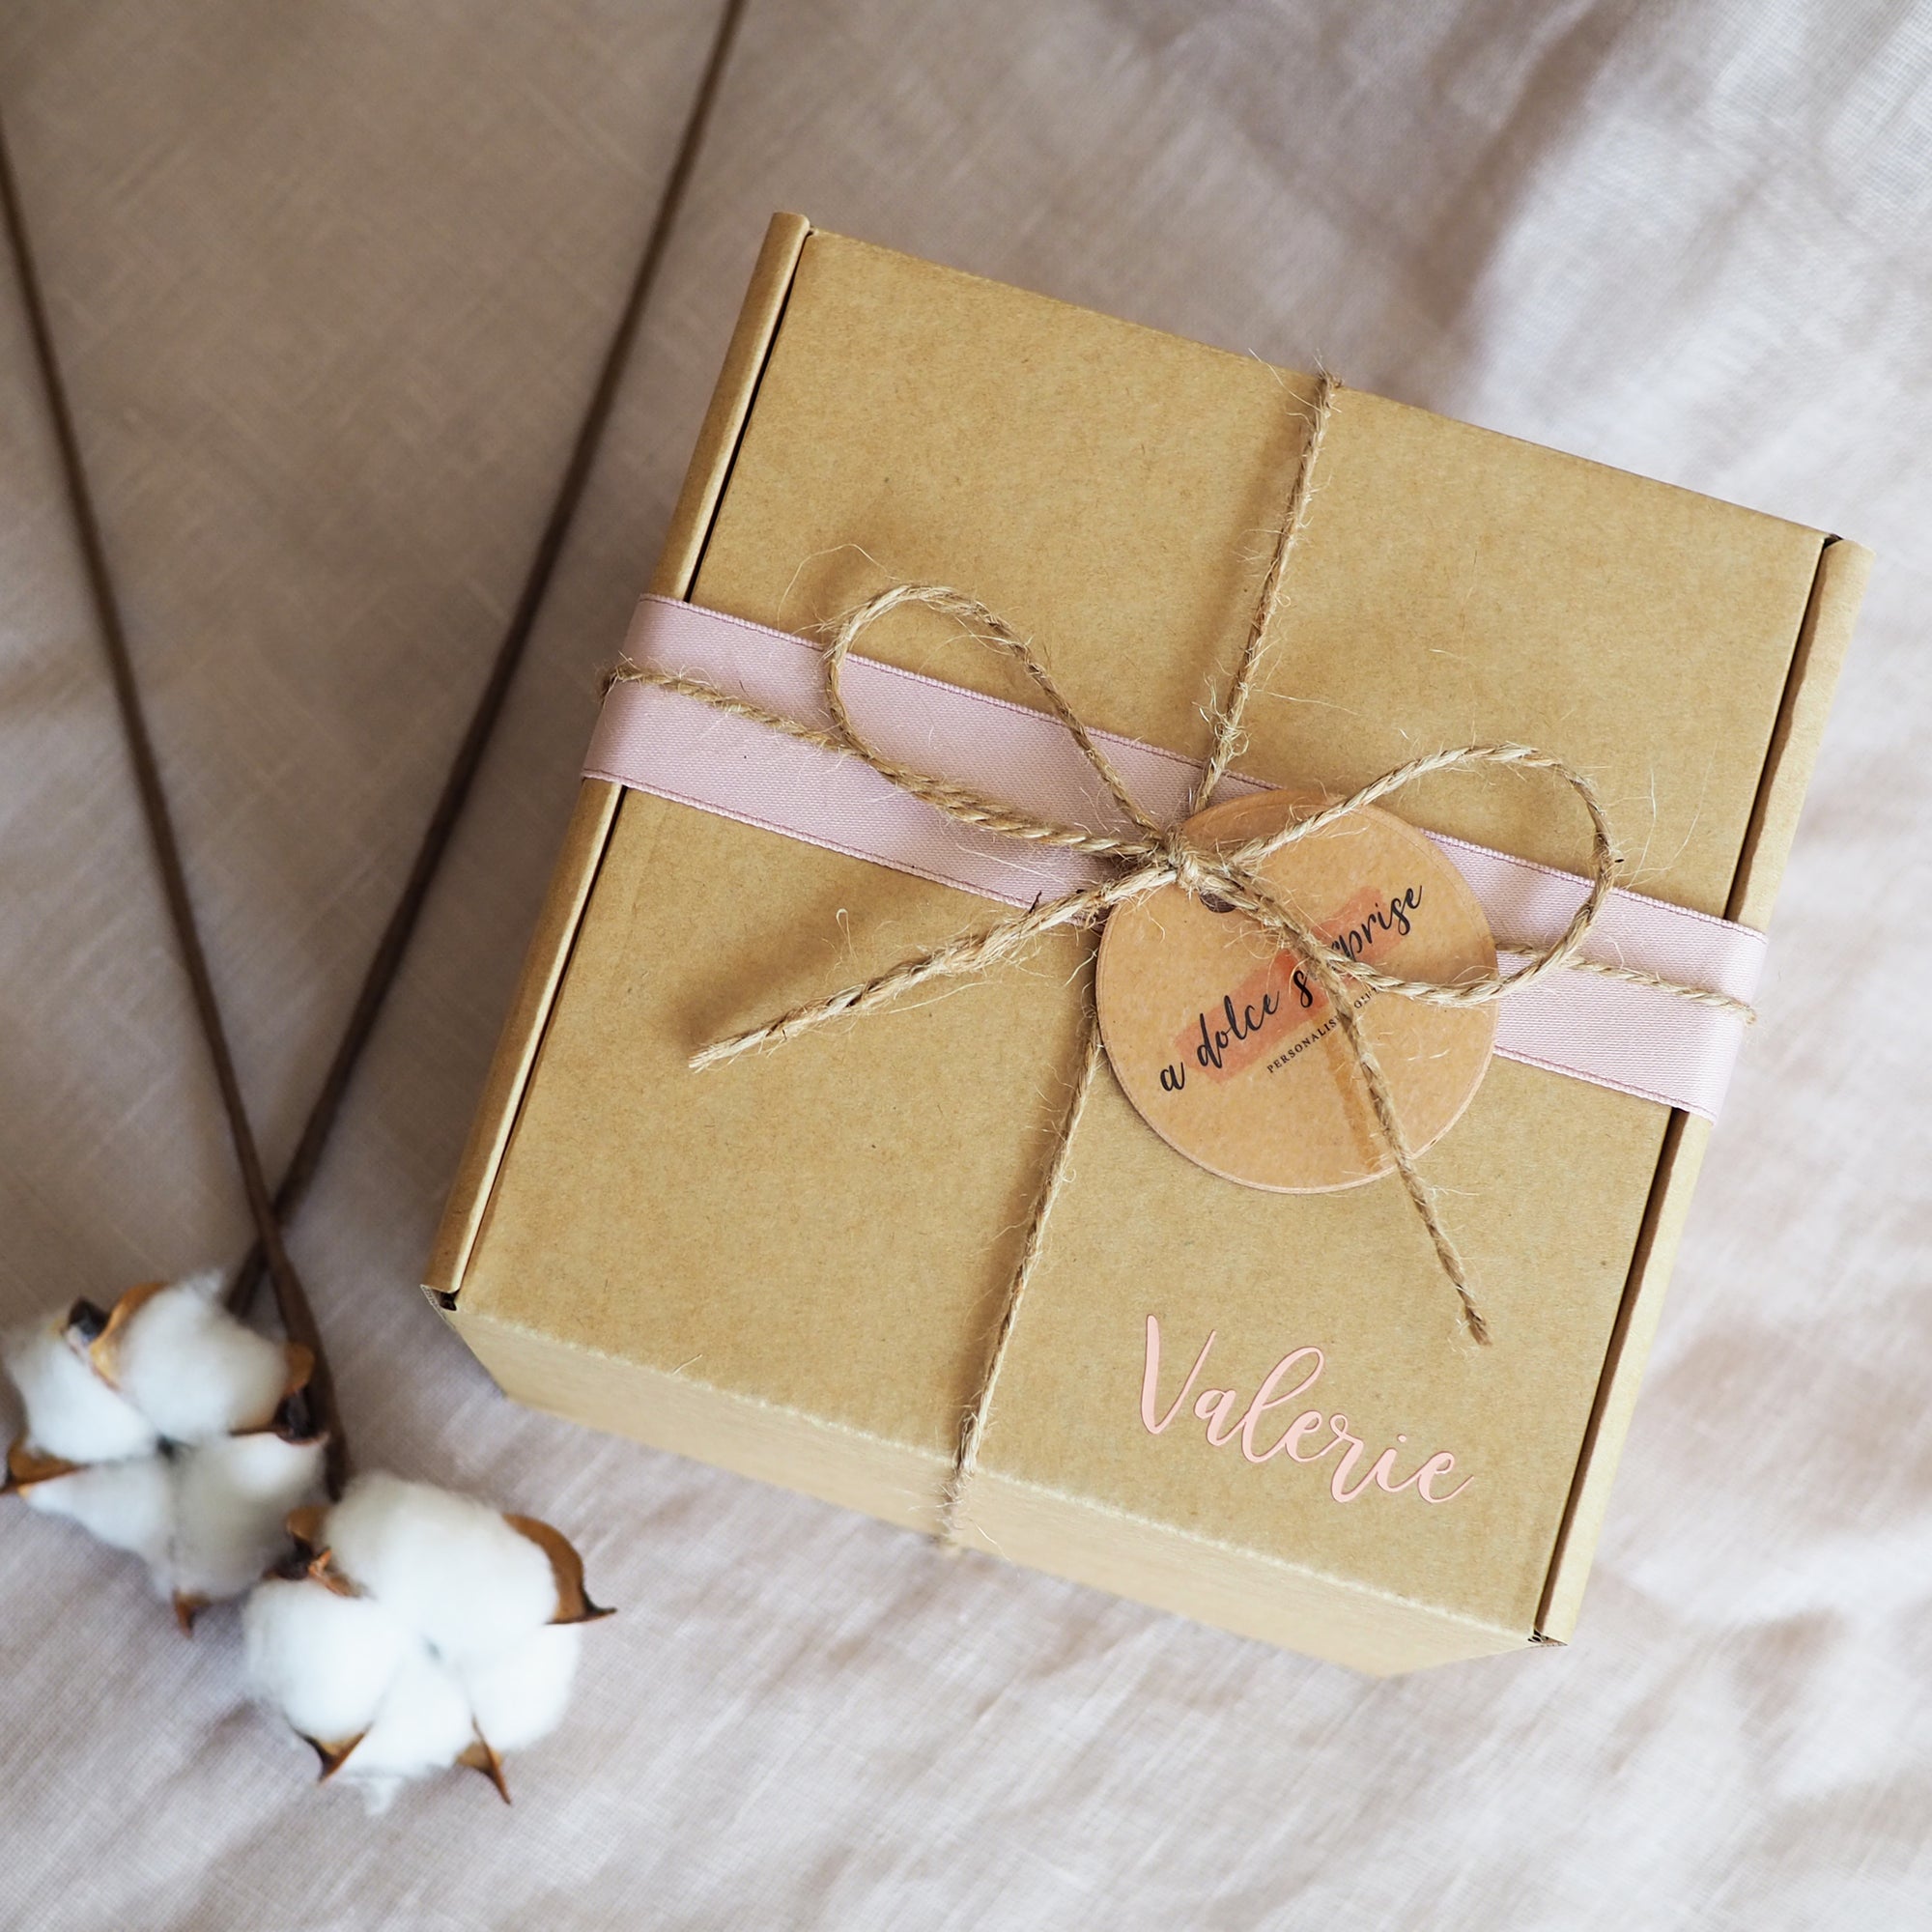 Personalization on Gift Boxes 